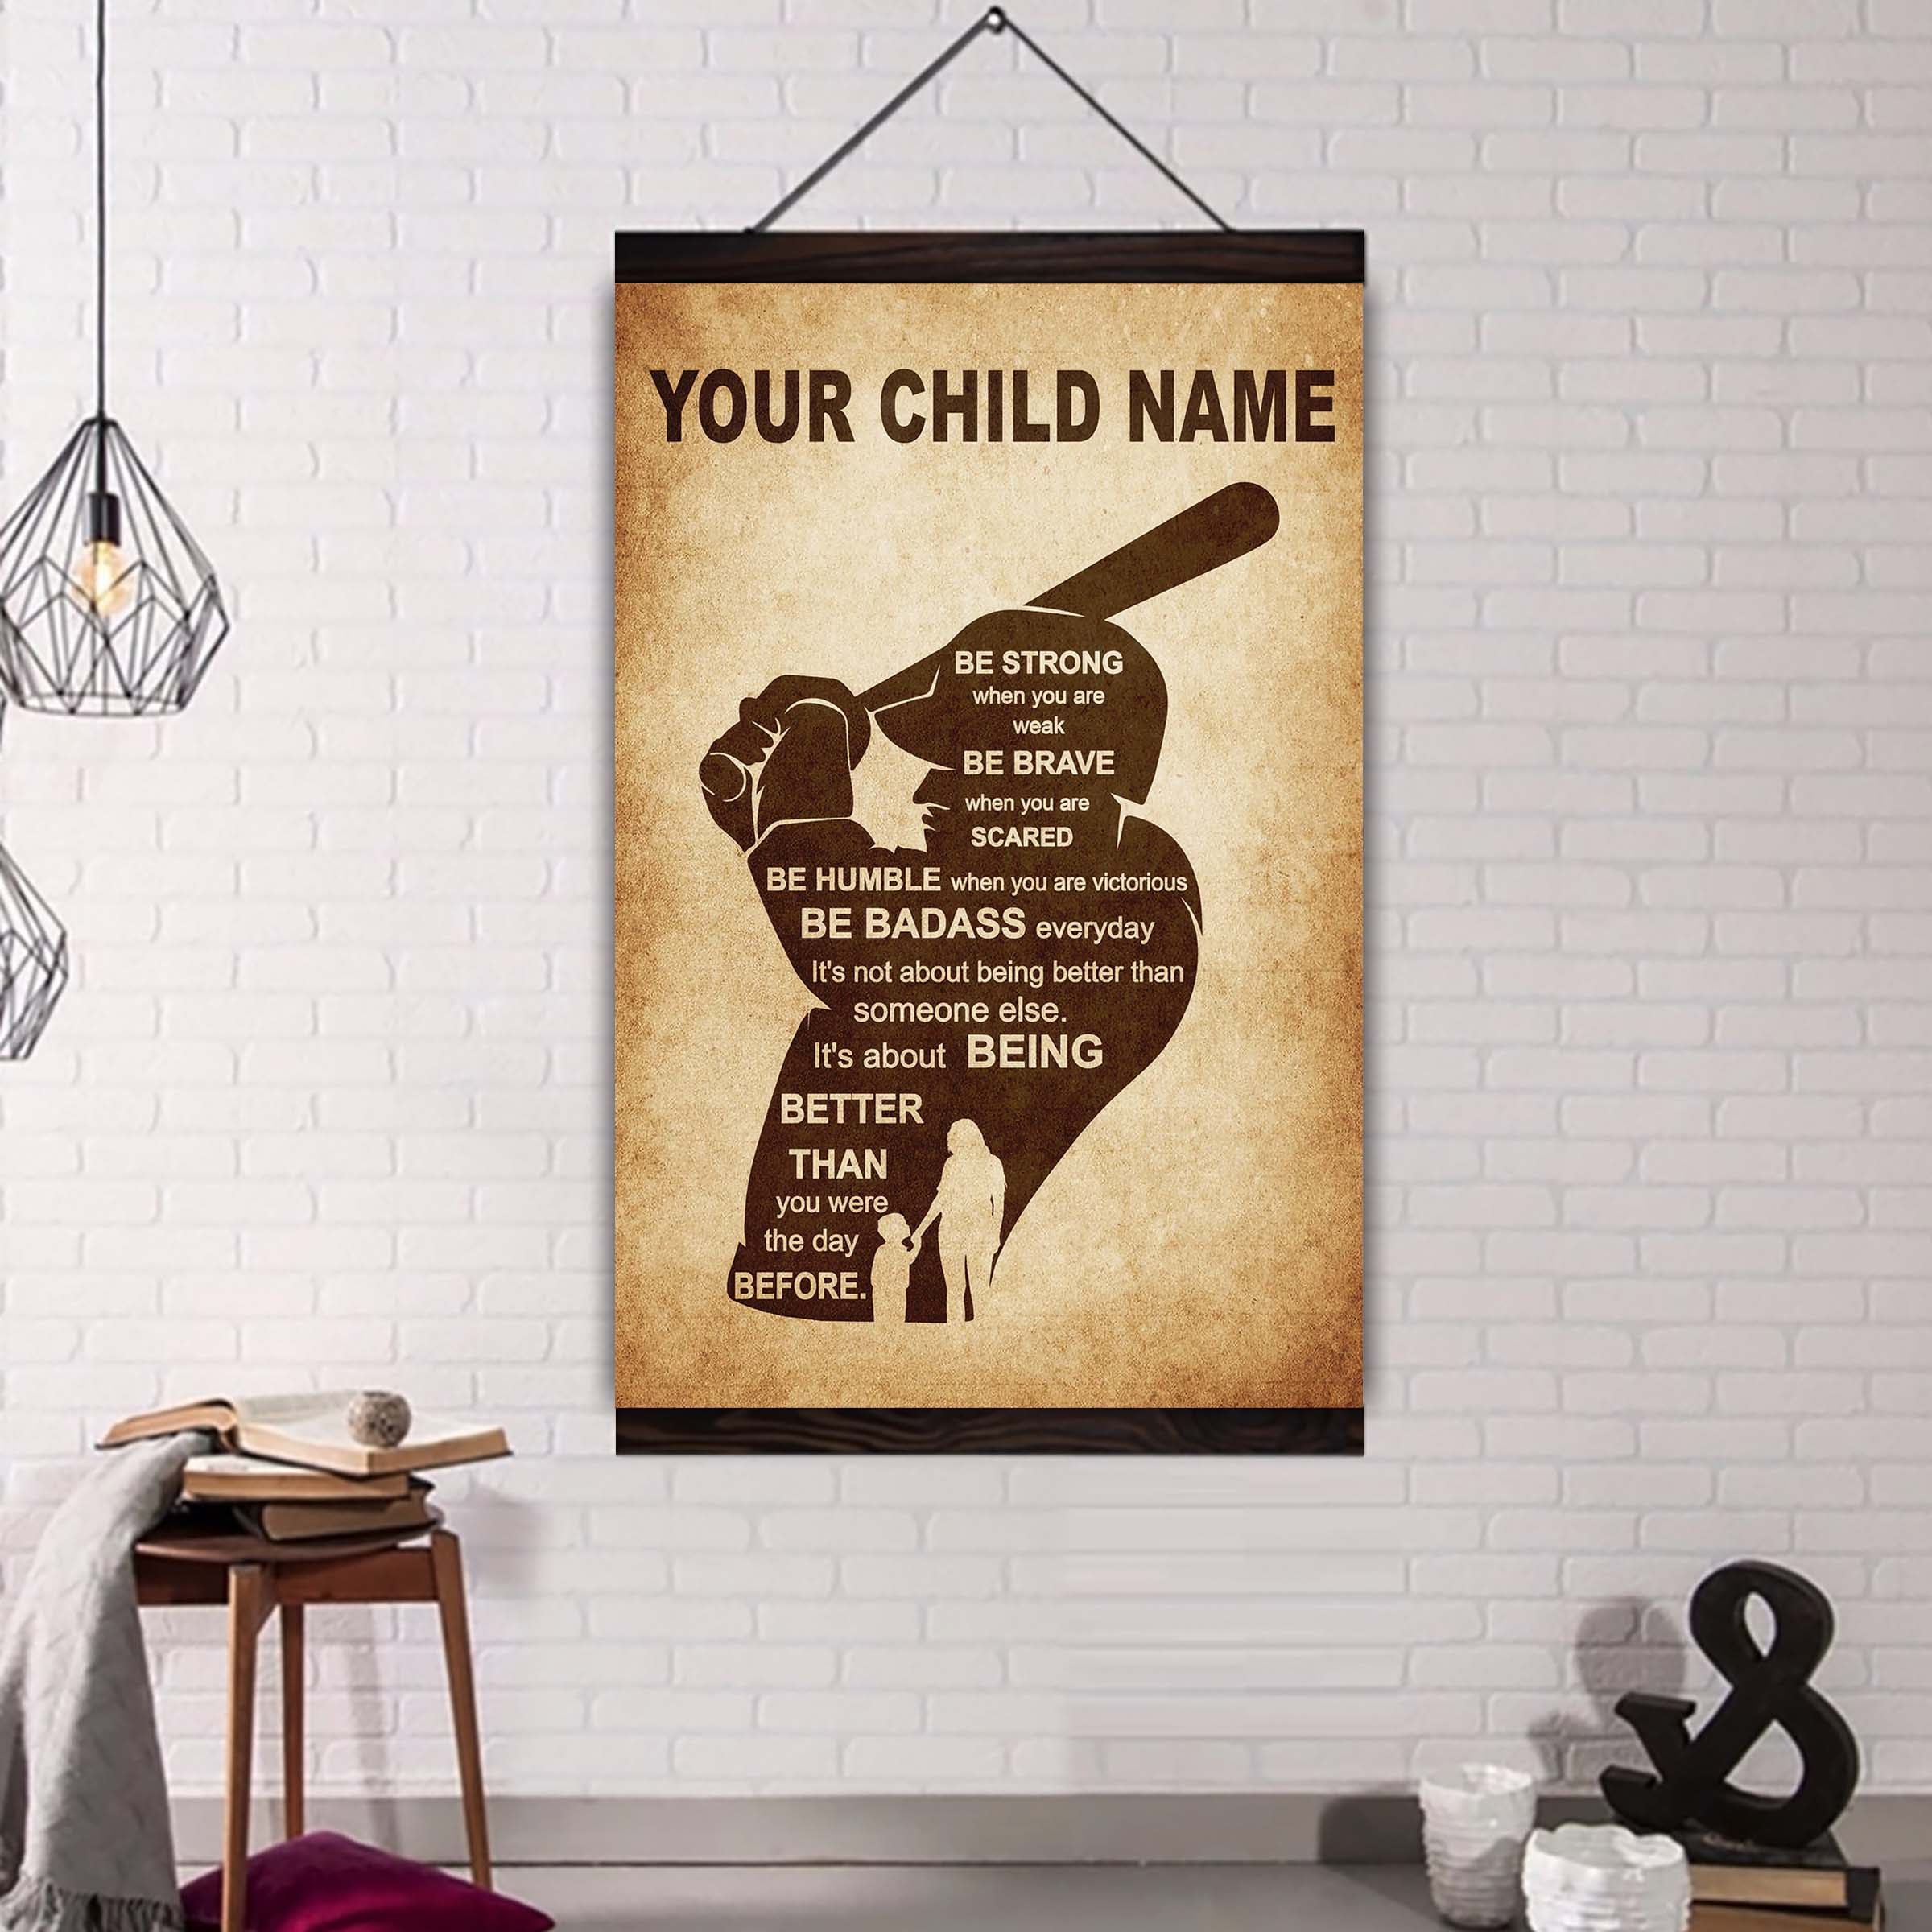 Personalized Your Child Name From Mom To Son Basketball Poster Canvas It's Not About Being Better Than Someone Else It's About Being Better Than You Were The Day Before